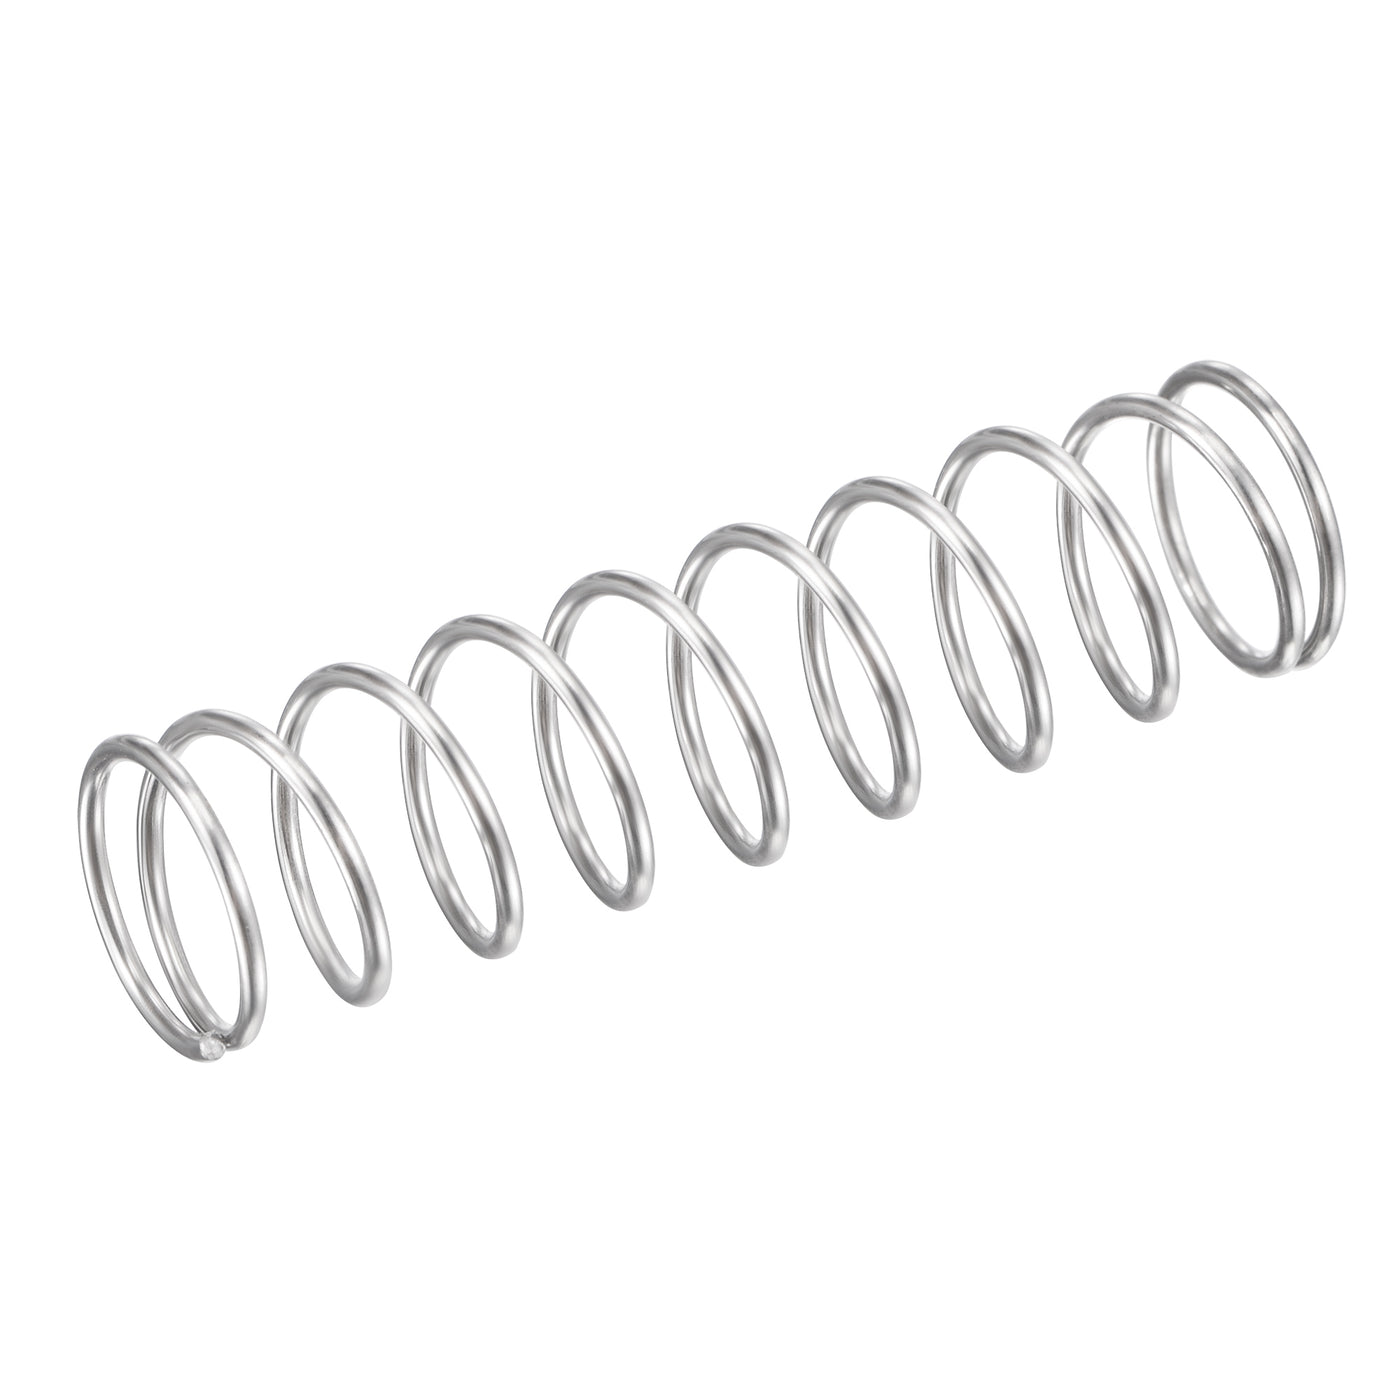 uxcell Uxcell 11mmx0.9mmx40mm 304 Stainless Steel Compression Spring 11N Load Capacity 20pcs